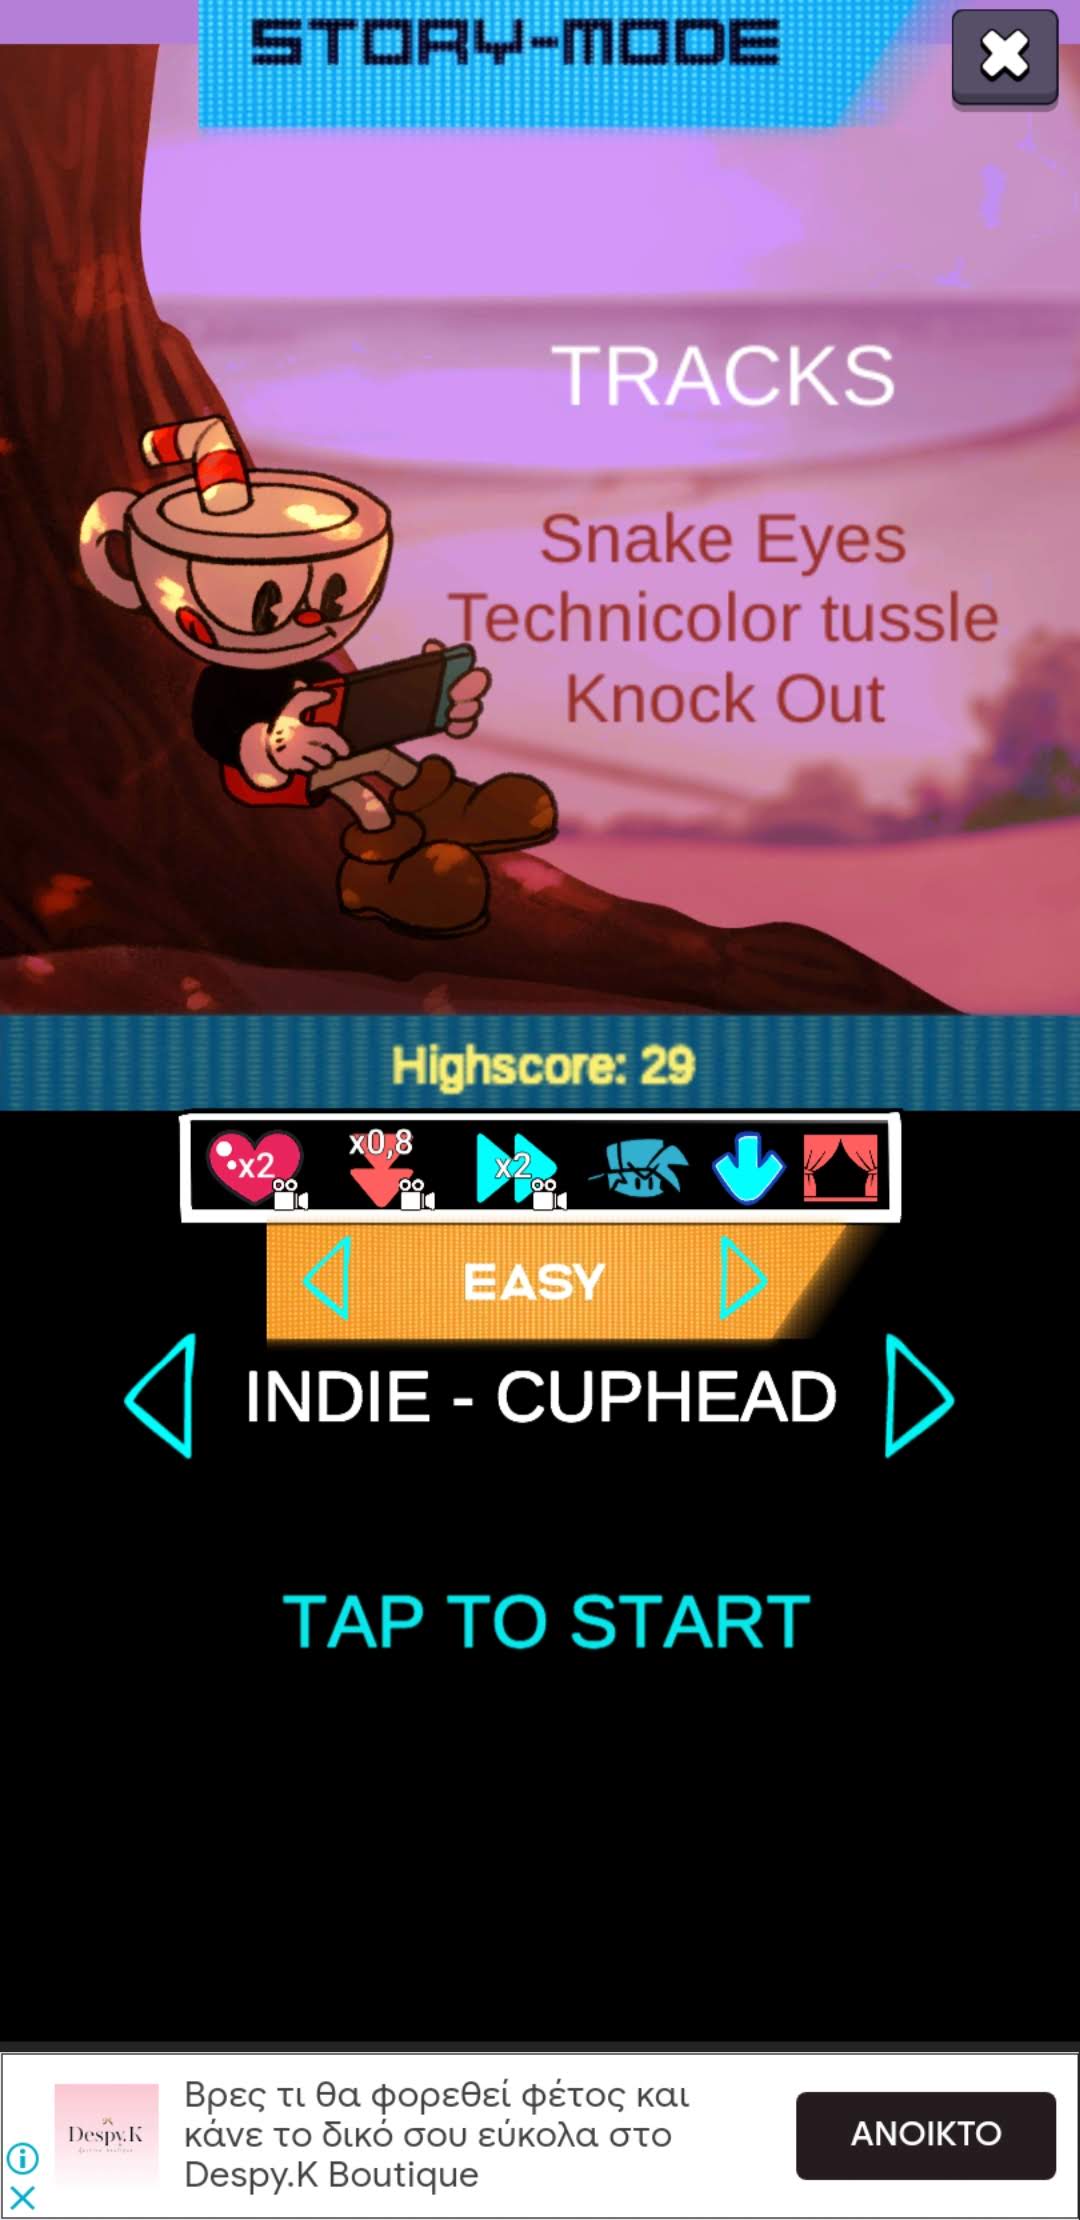 App FNF Indie Cross Mod Android game 2022 